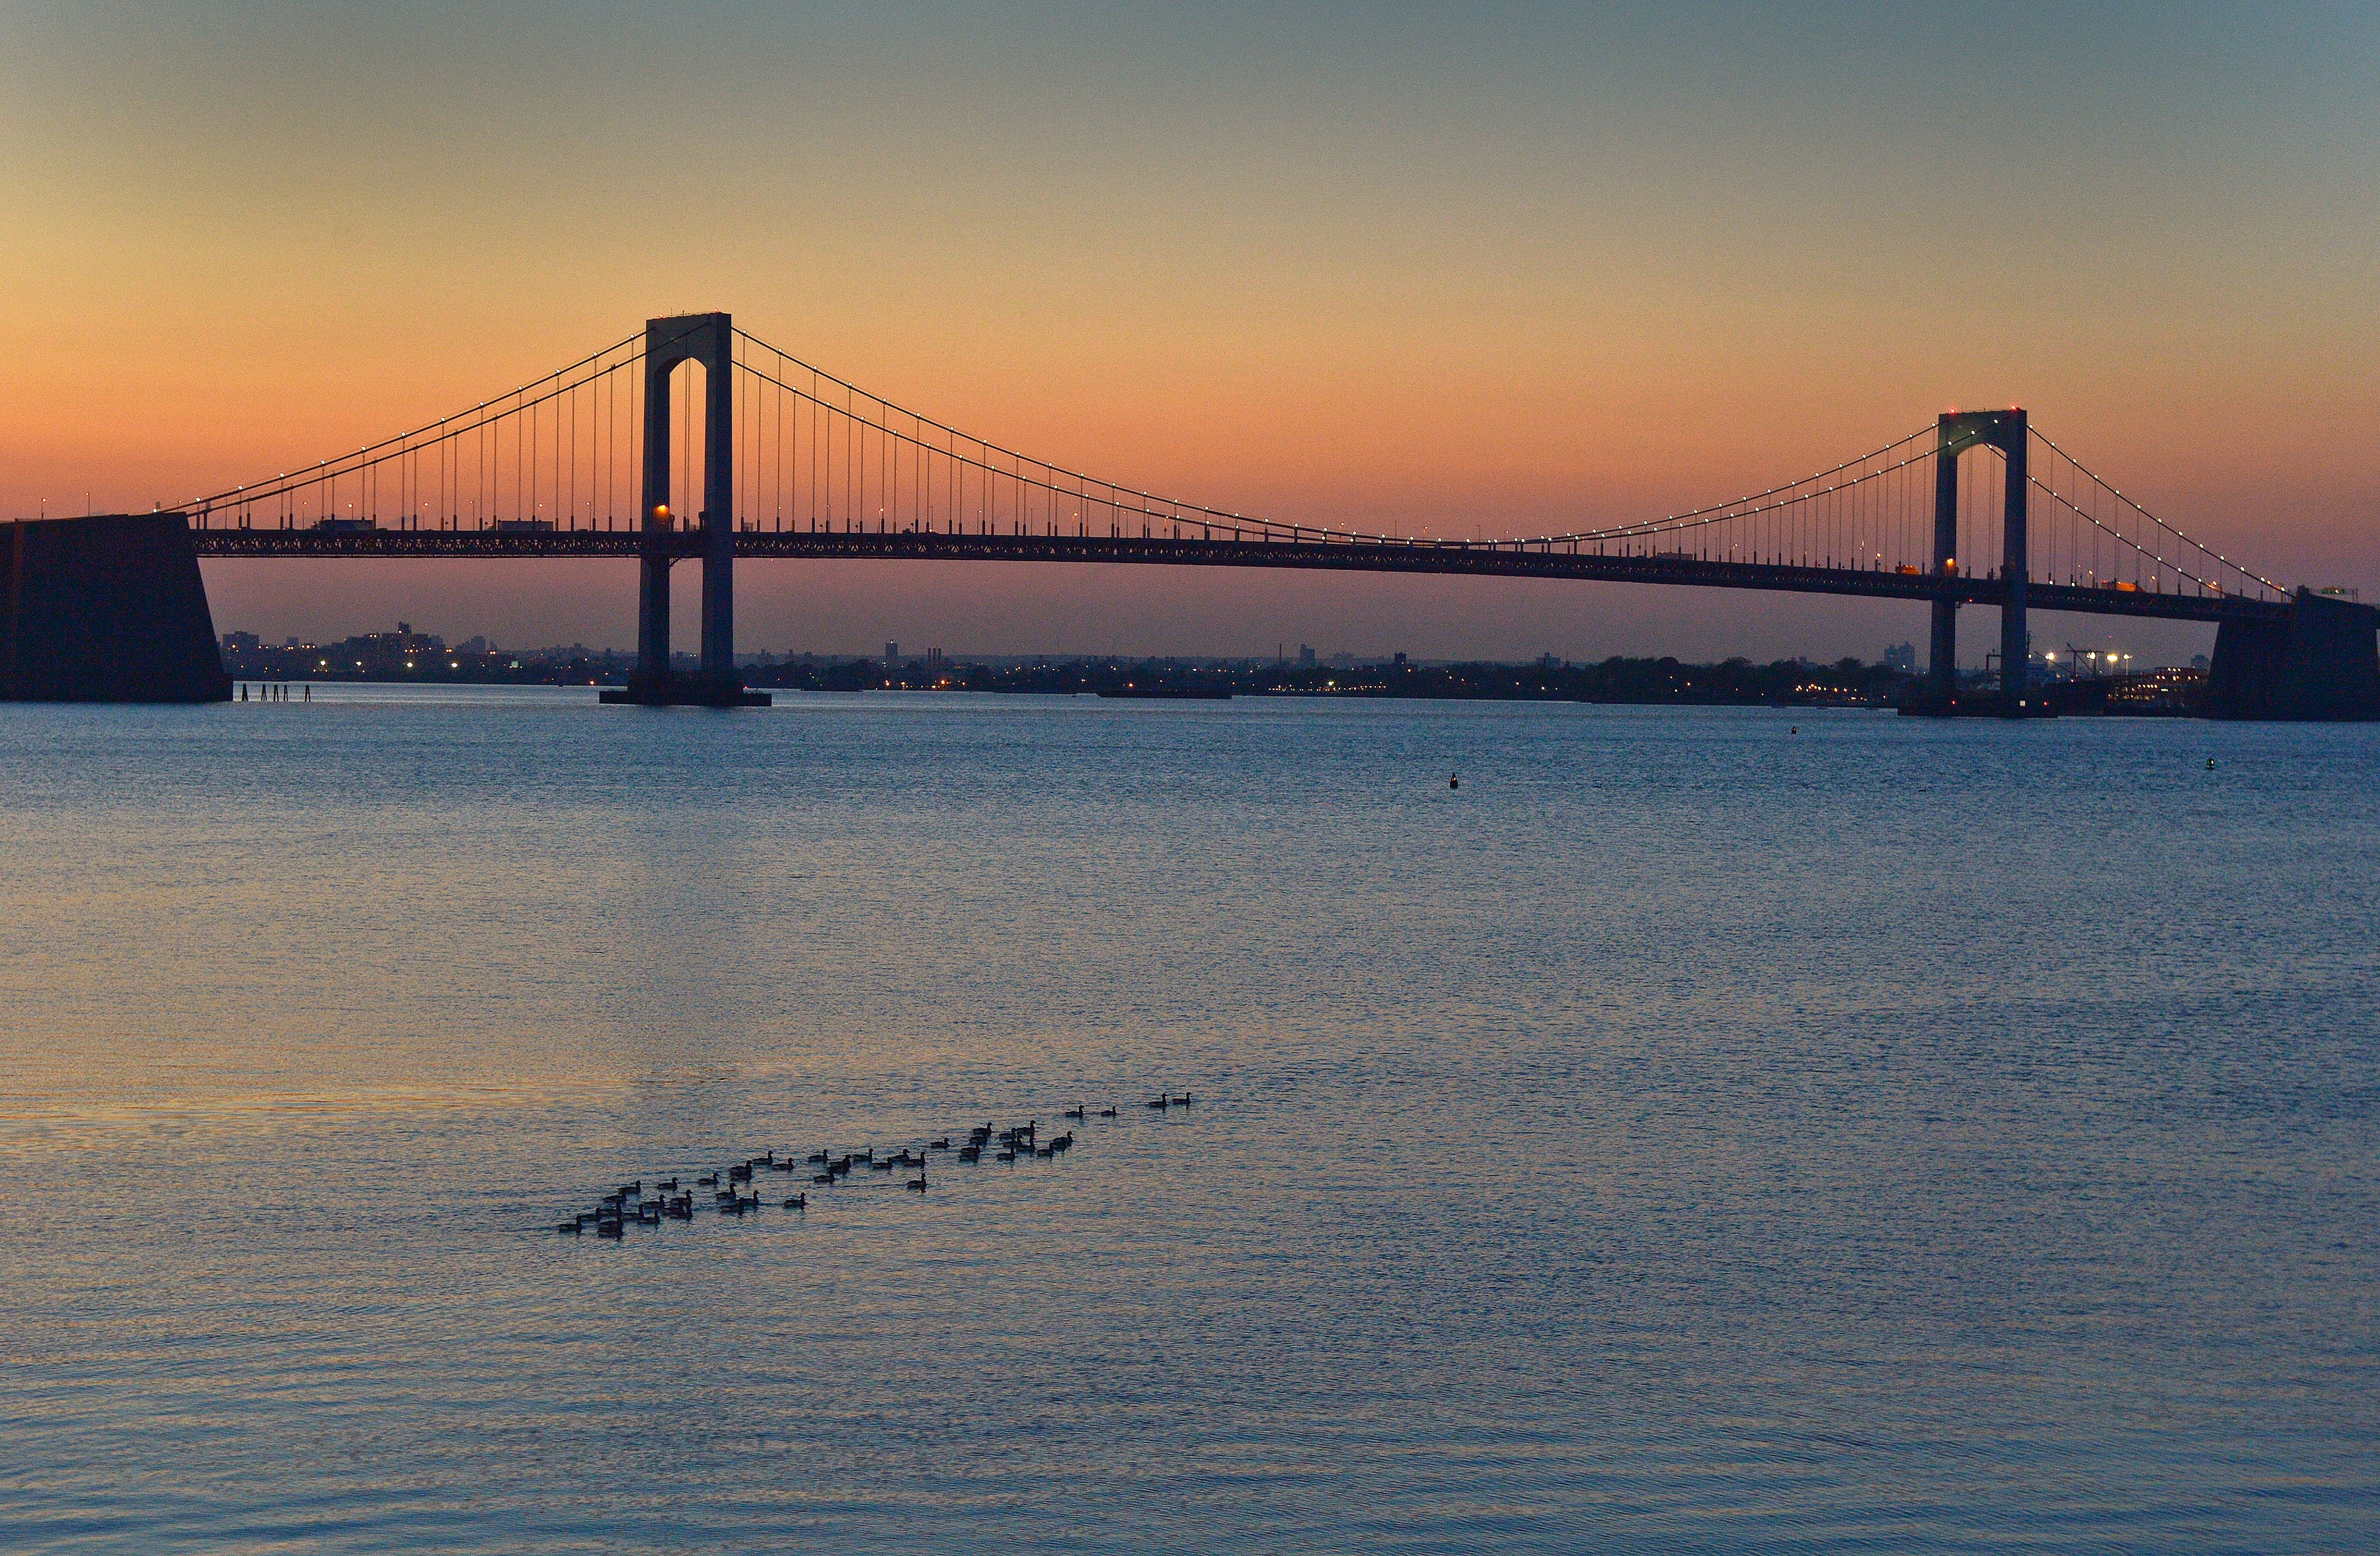 A bridge stretches across a body of water with a sunset visible in the background and waterfowl in the foreground.